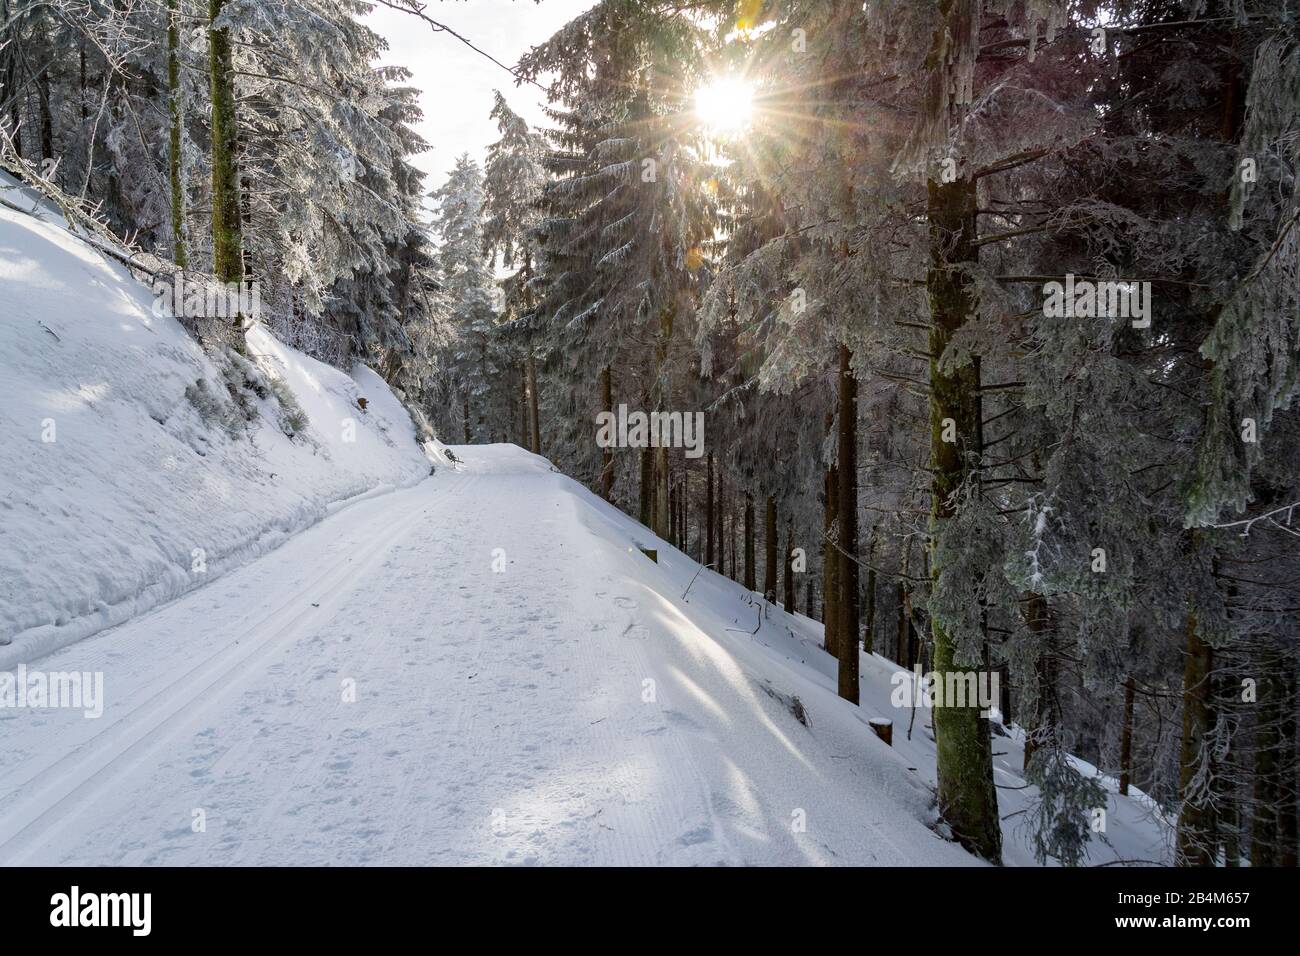 Germany, Baden-Württemberg, Black Forest, forest path in the national park. Stock Photo